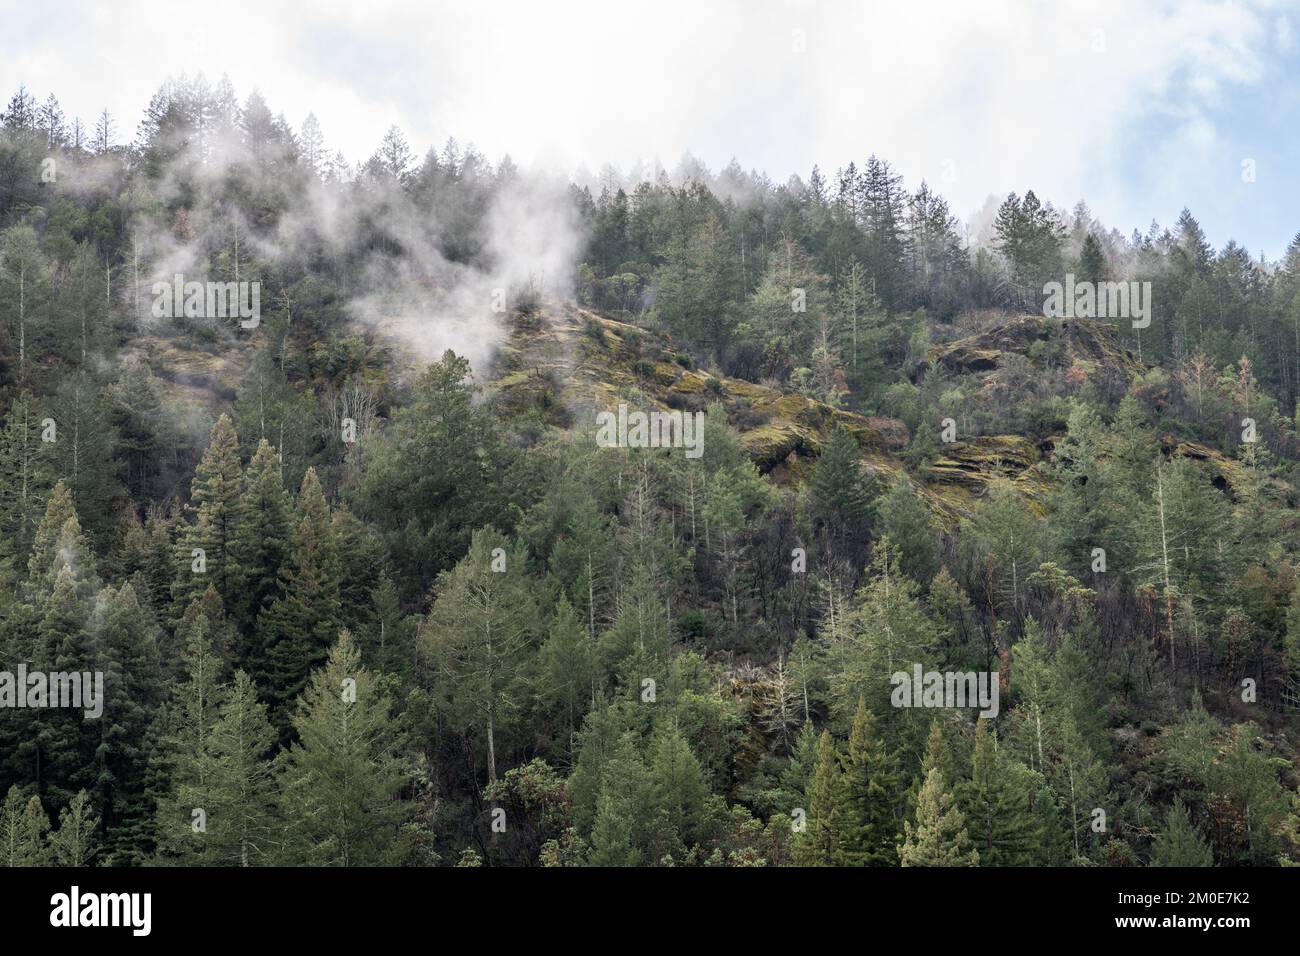 A foggy mountainside densely covered in douglas firs in Northern California, USA, North America. Stock Photo